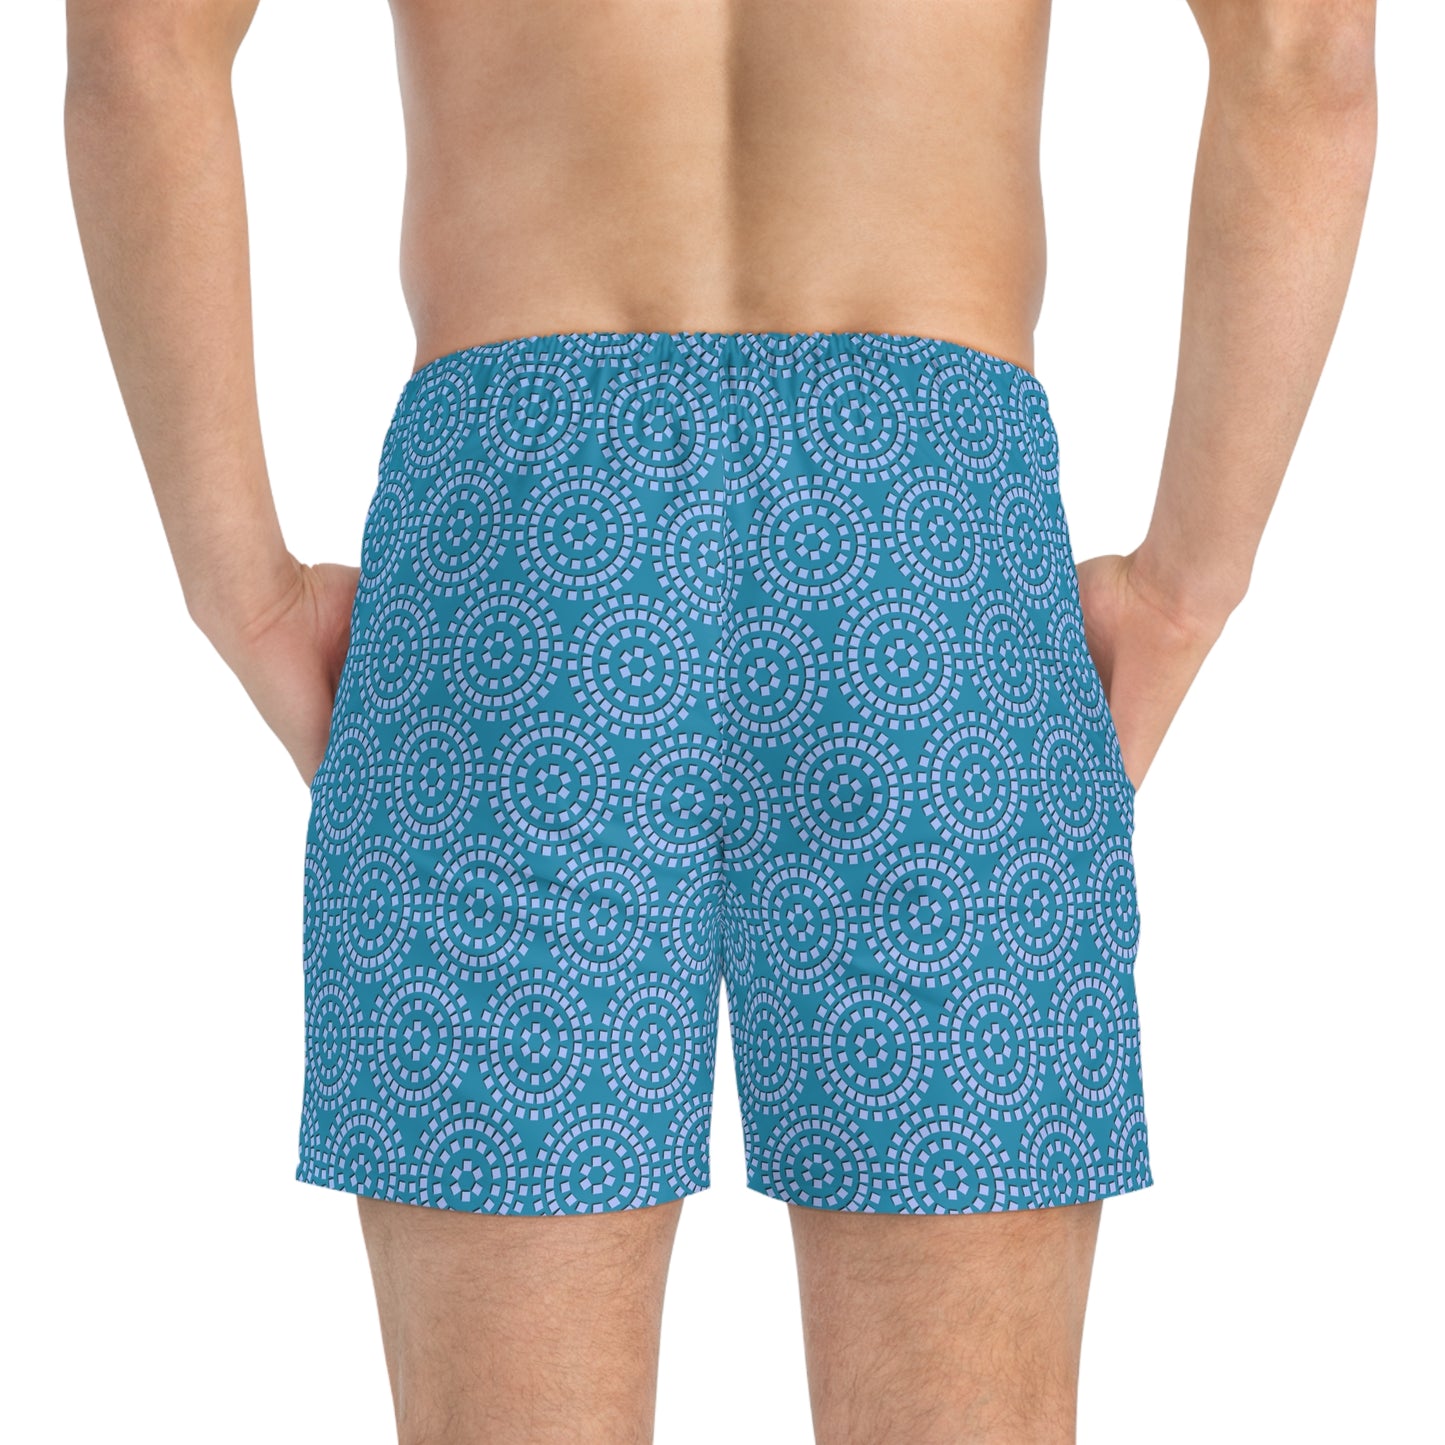 Circles and More Circles - Turquoise - Swim Trunks